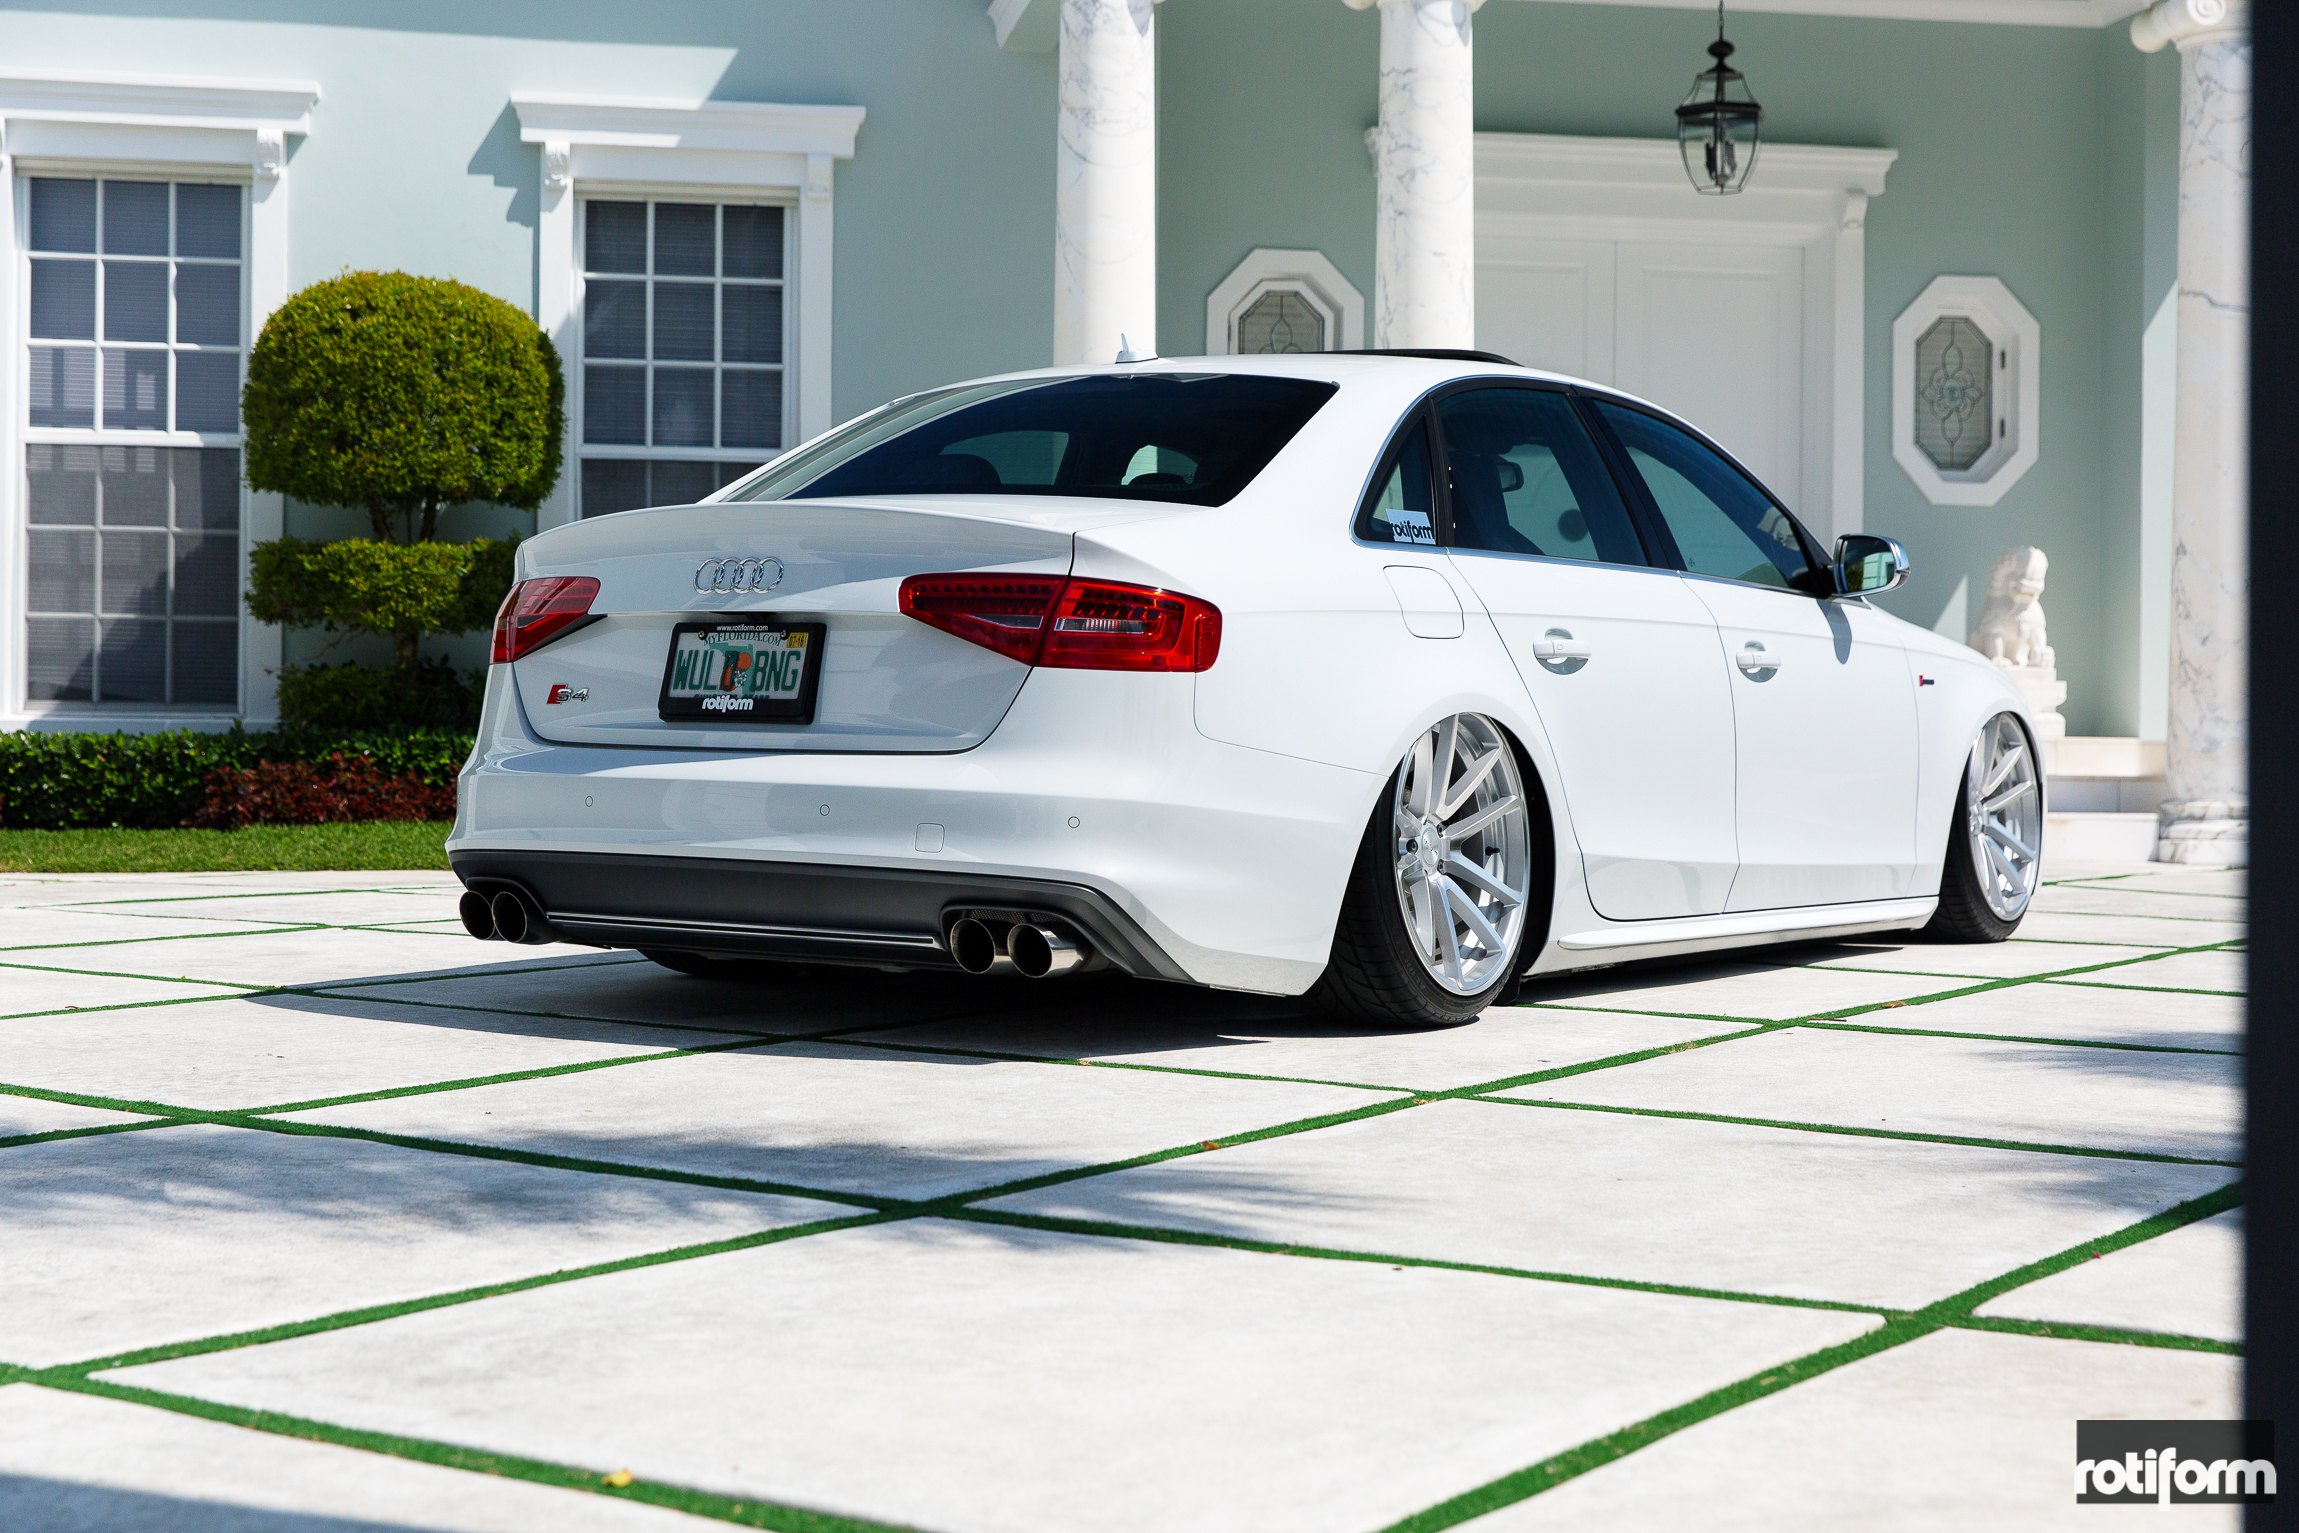 White Audi S4 with Custom Red LED Taillights - Photo by Rotiform